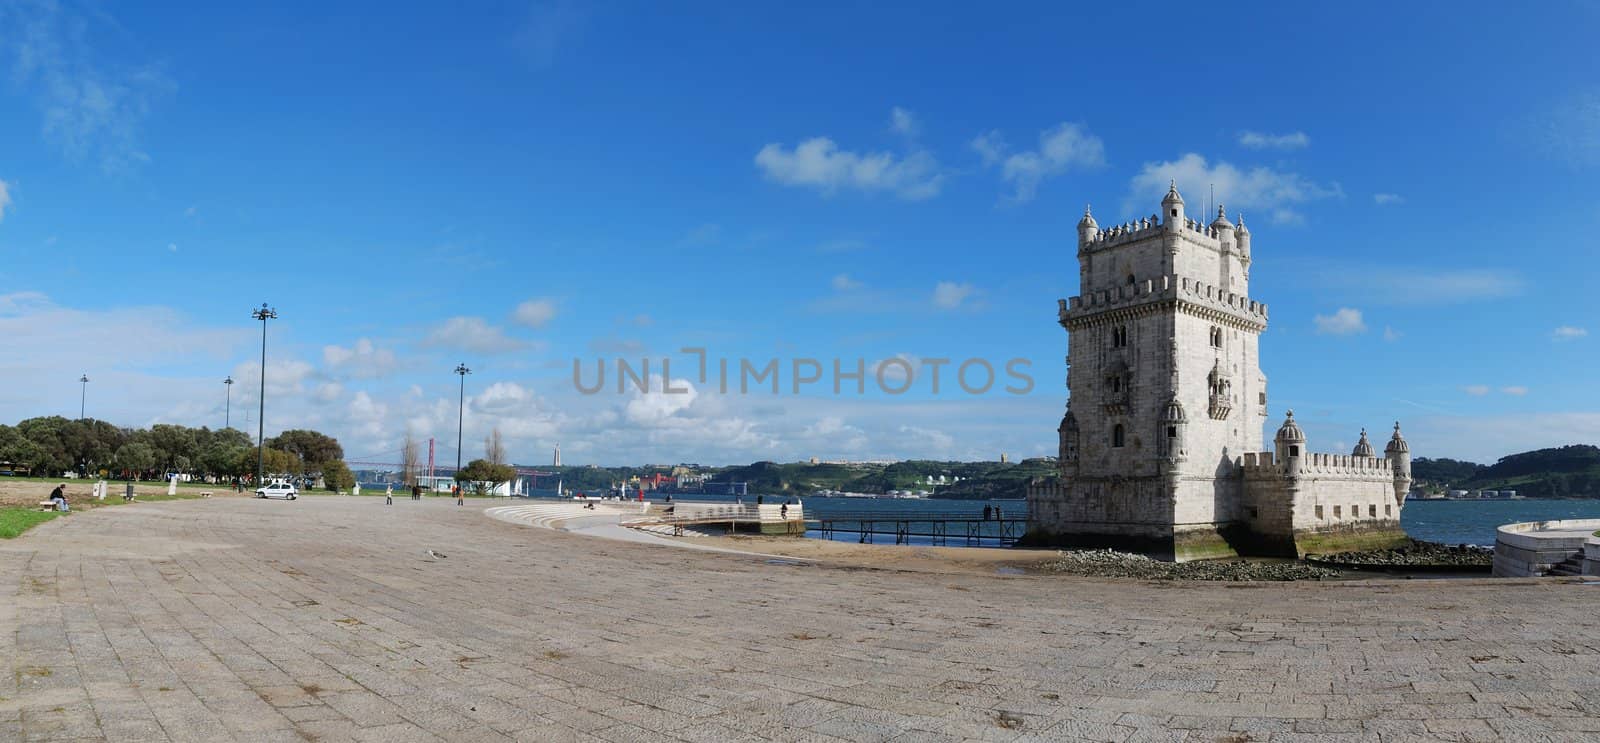 Belem Tower in Lisbon, Portugal by luissantos84